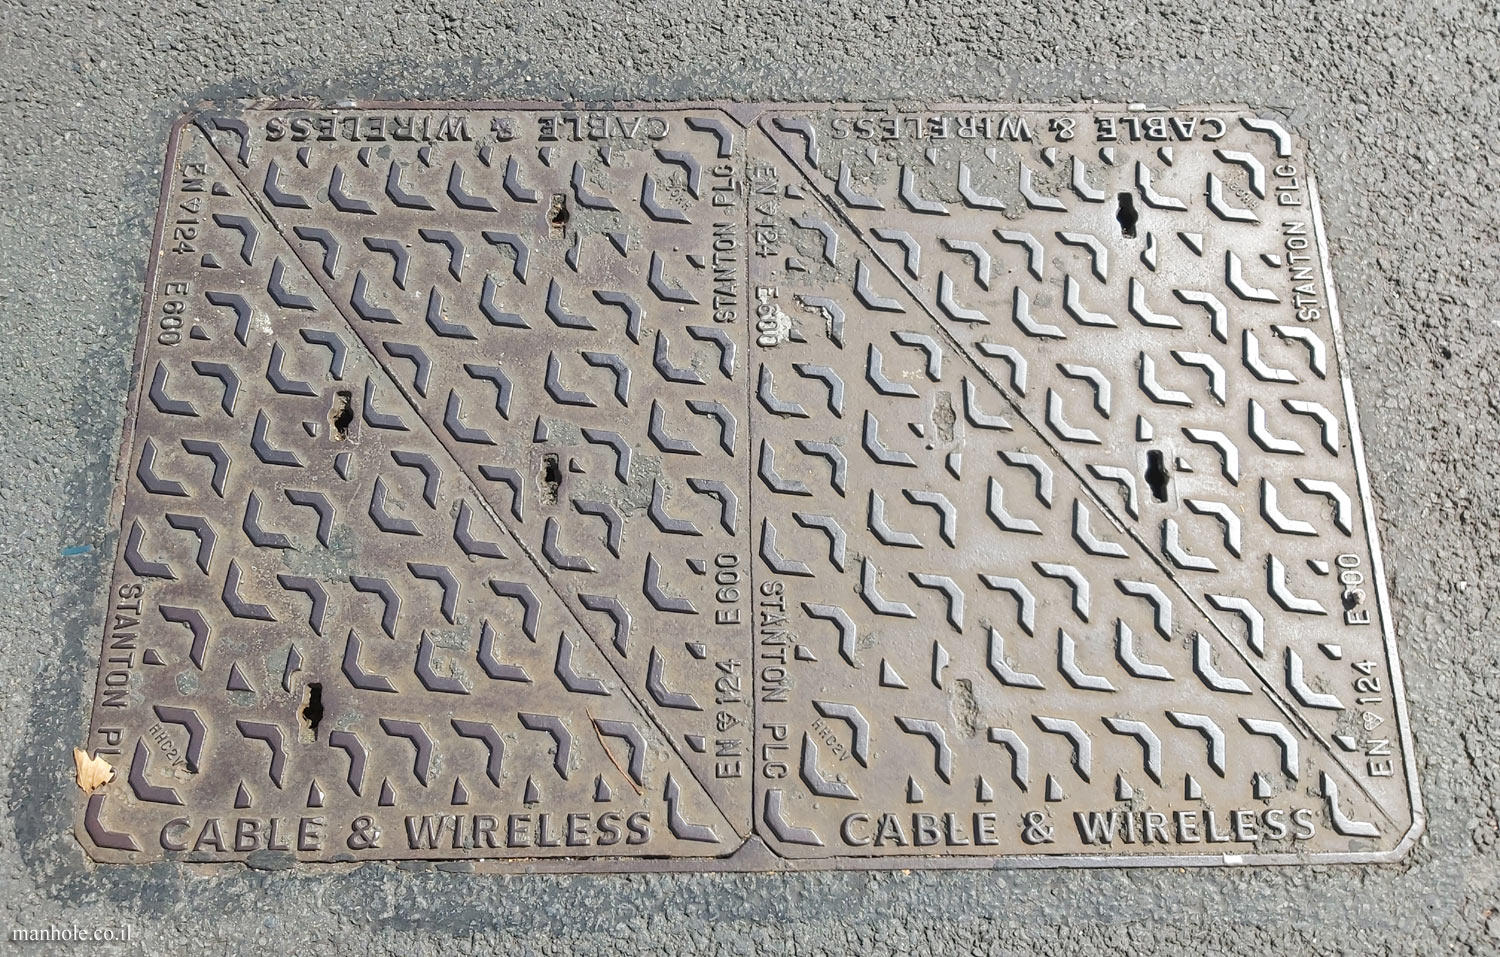 London - Cables and Wireless Communications - Modular diagonal